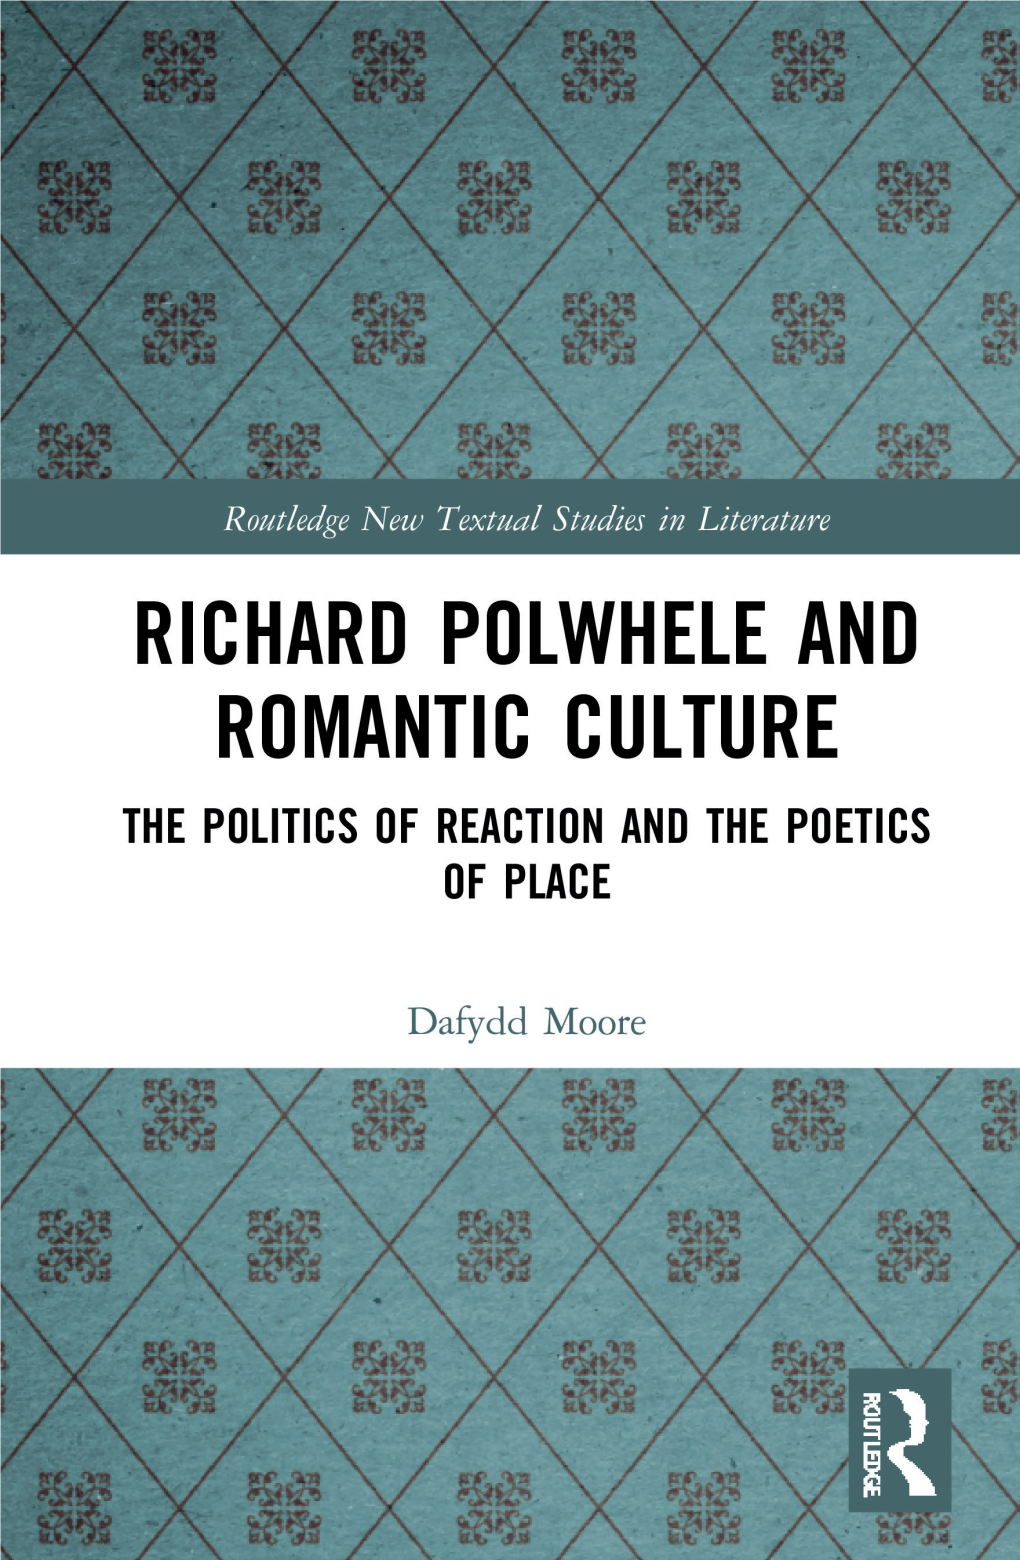 Richard Polwhele and Romantic Culture; the Politics of Reaction